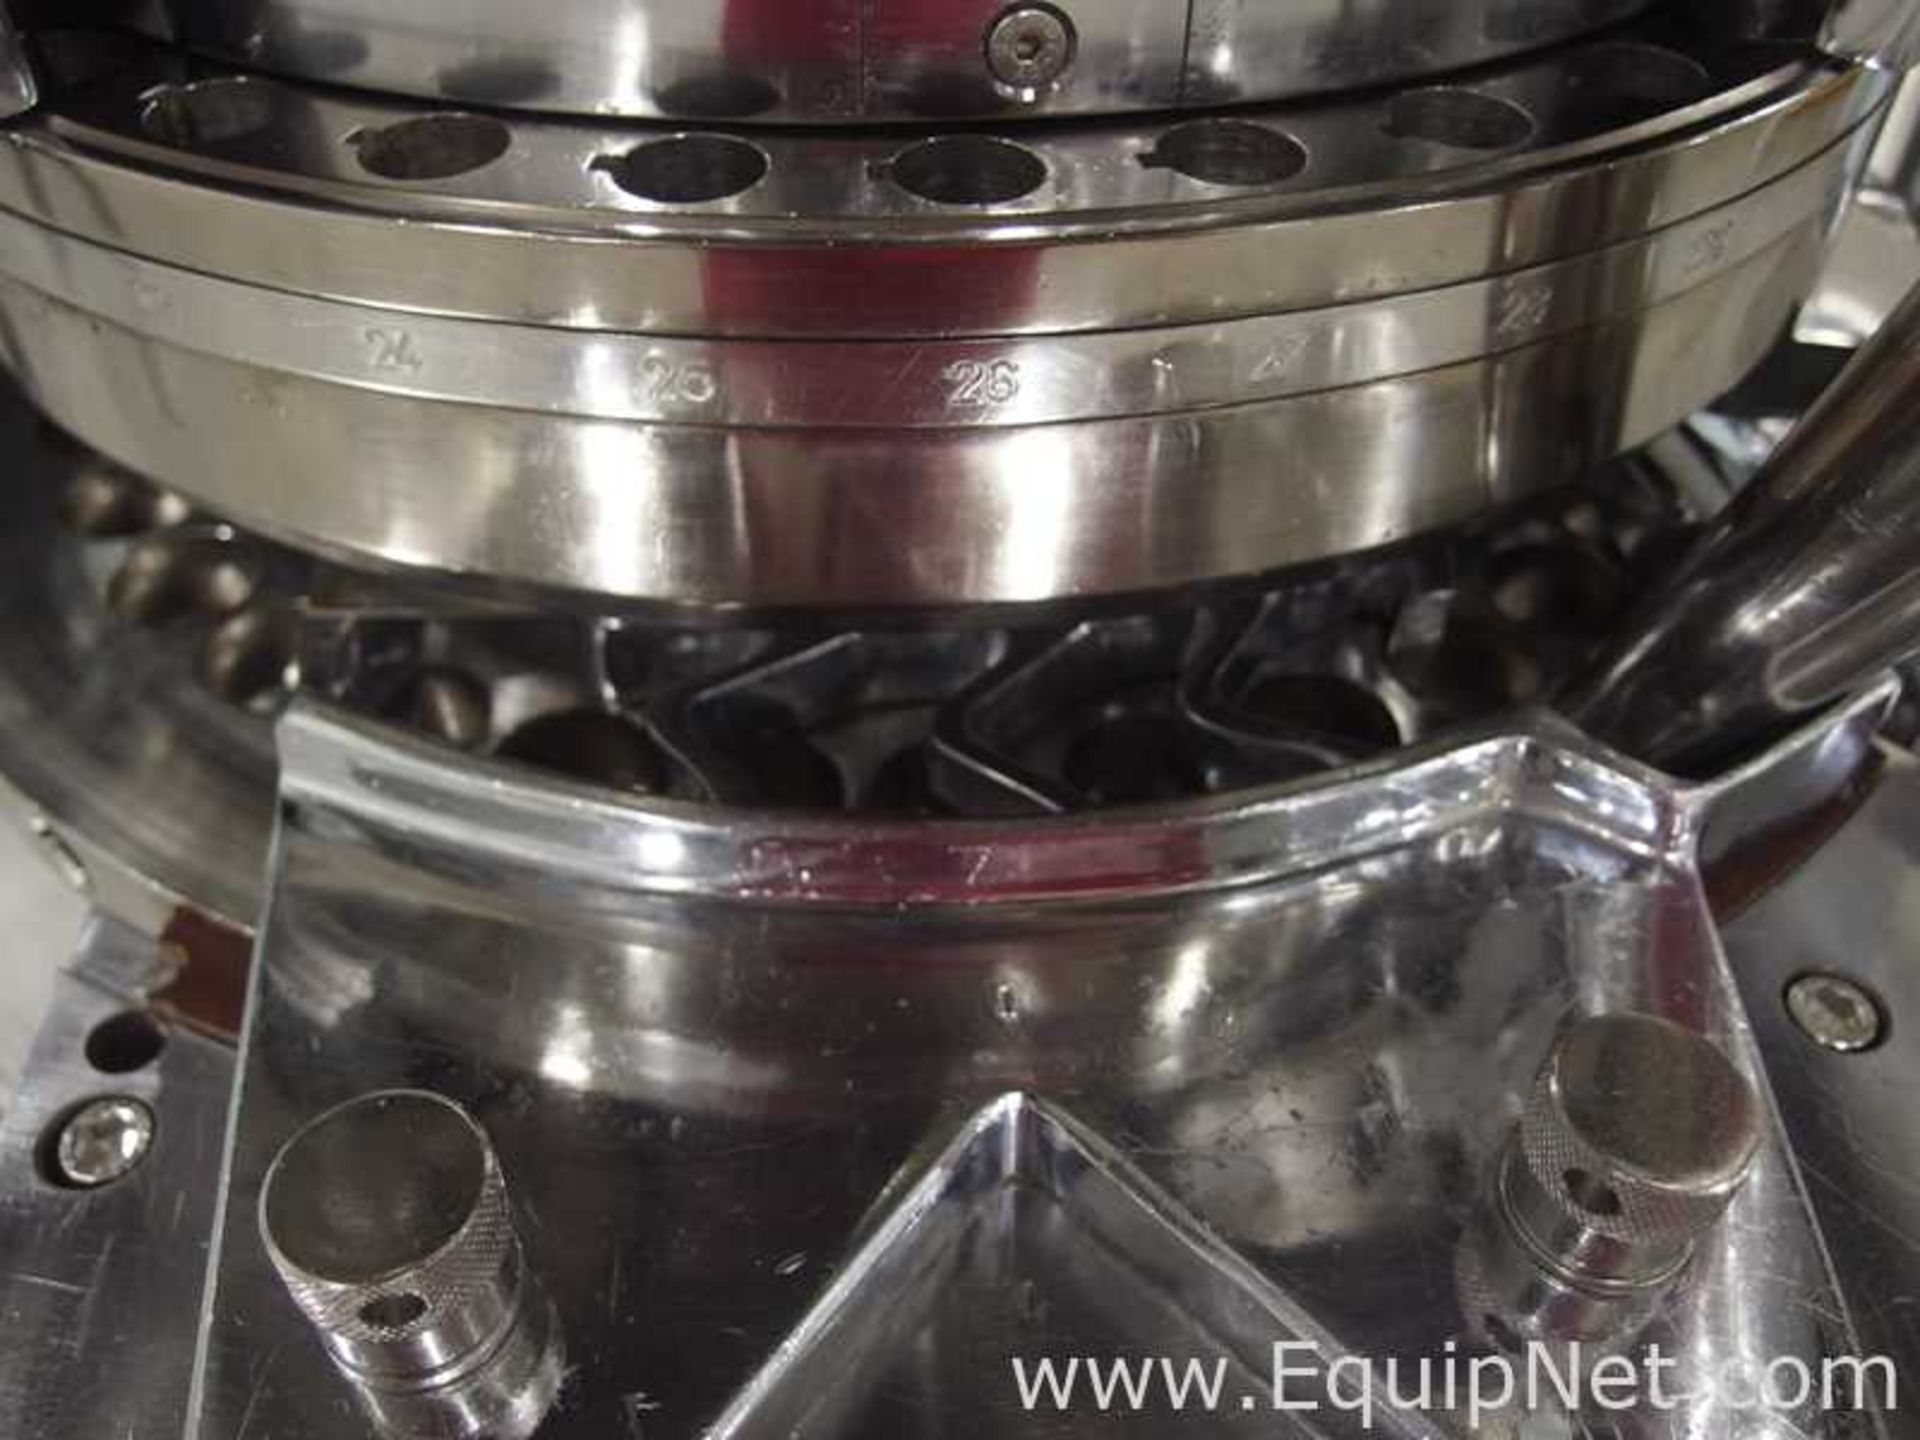 Fluidpack Accura B4 Double Rotary Tablet Press - Image 8 of 18